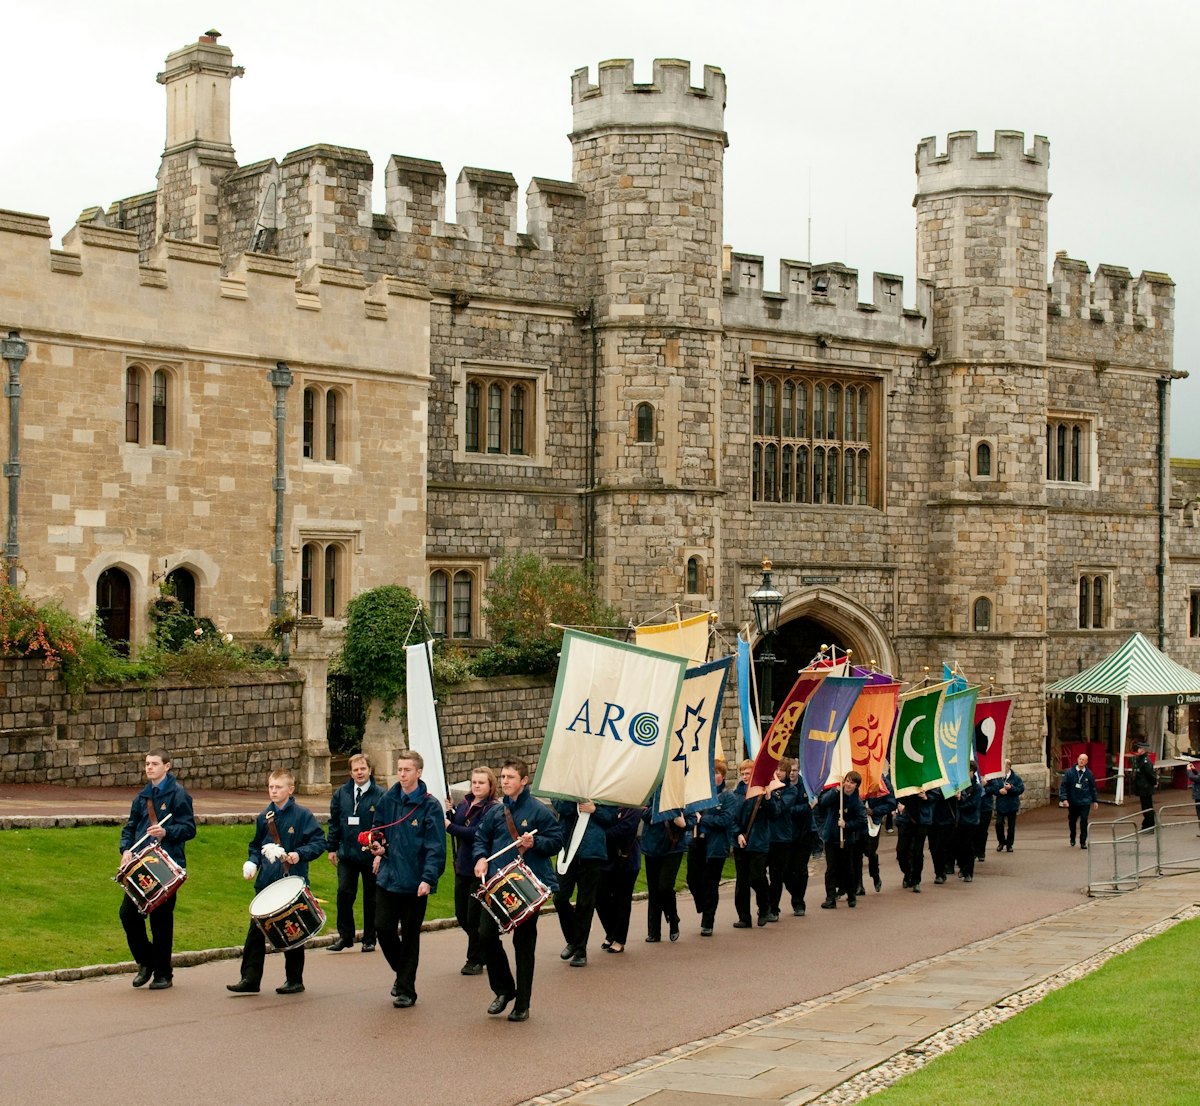 The procession of delegates enters Windsor Castle for the gathering hosted by the Alliance of Religions and Conservation (ARC) and the UN Development Programme. (Photos courtesy of ARC/Richard Stonehouse)